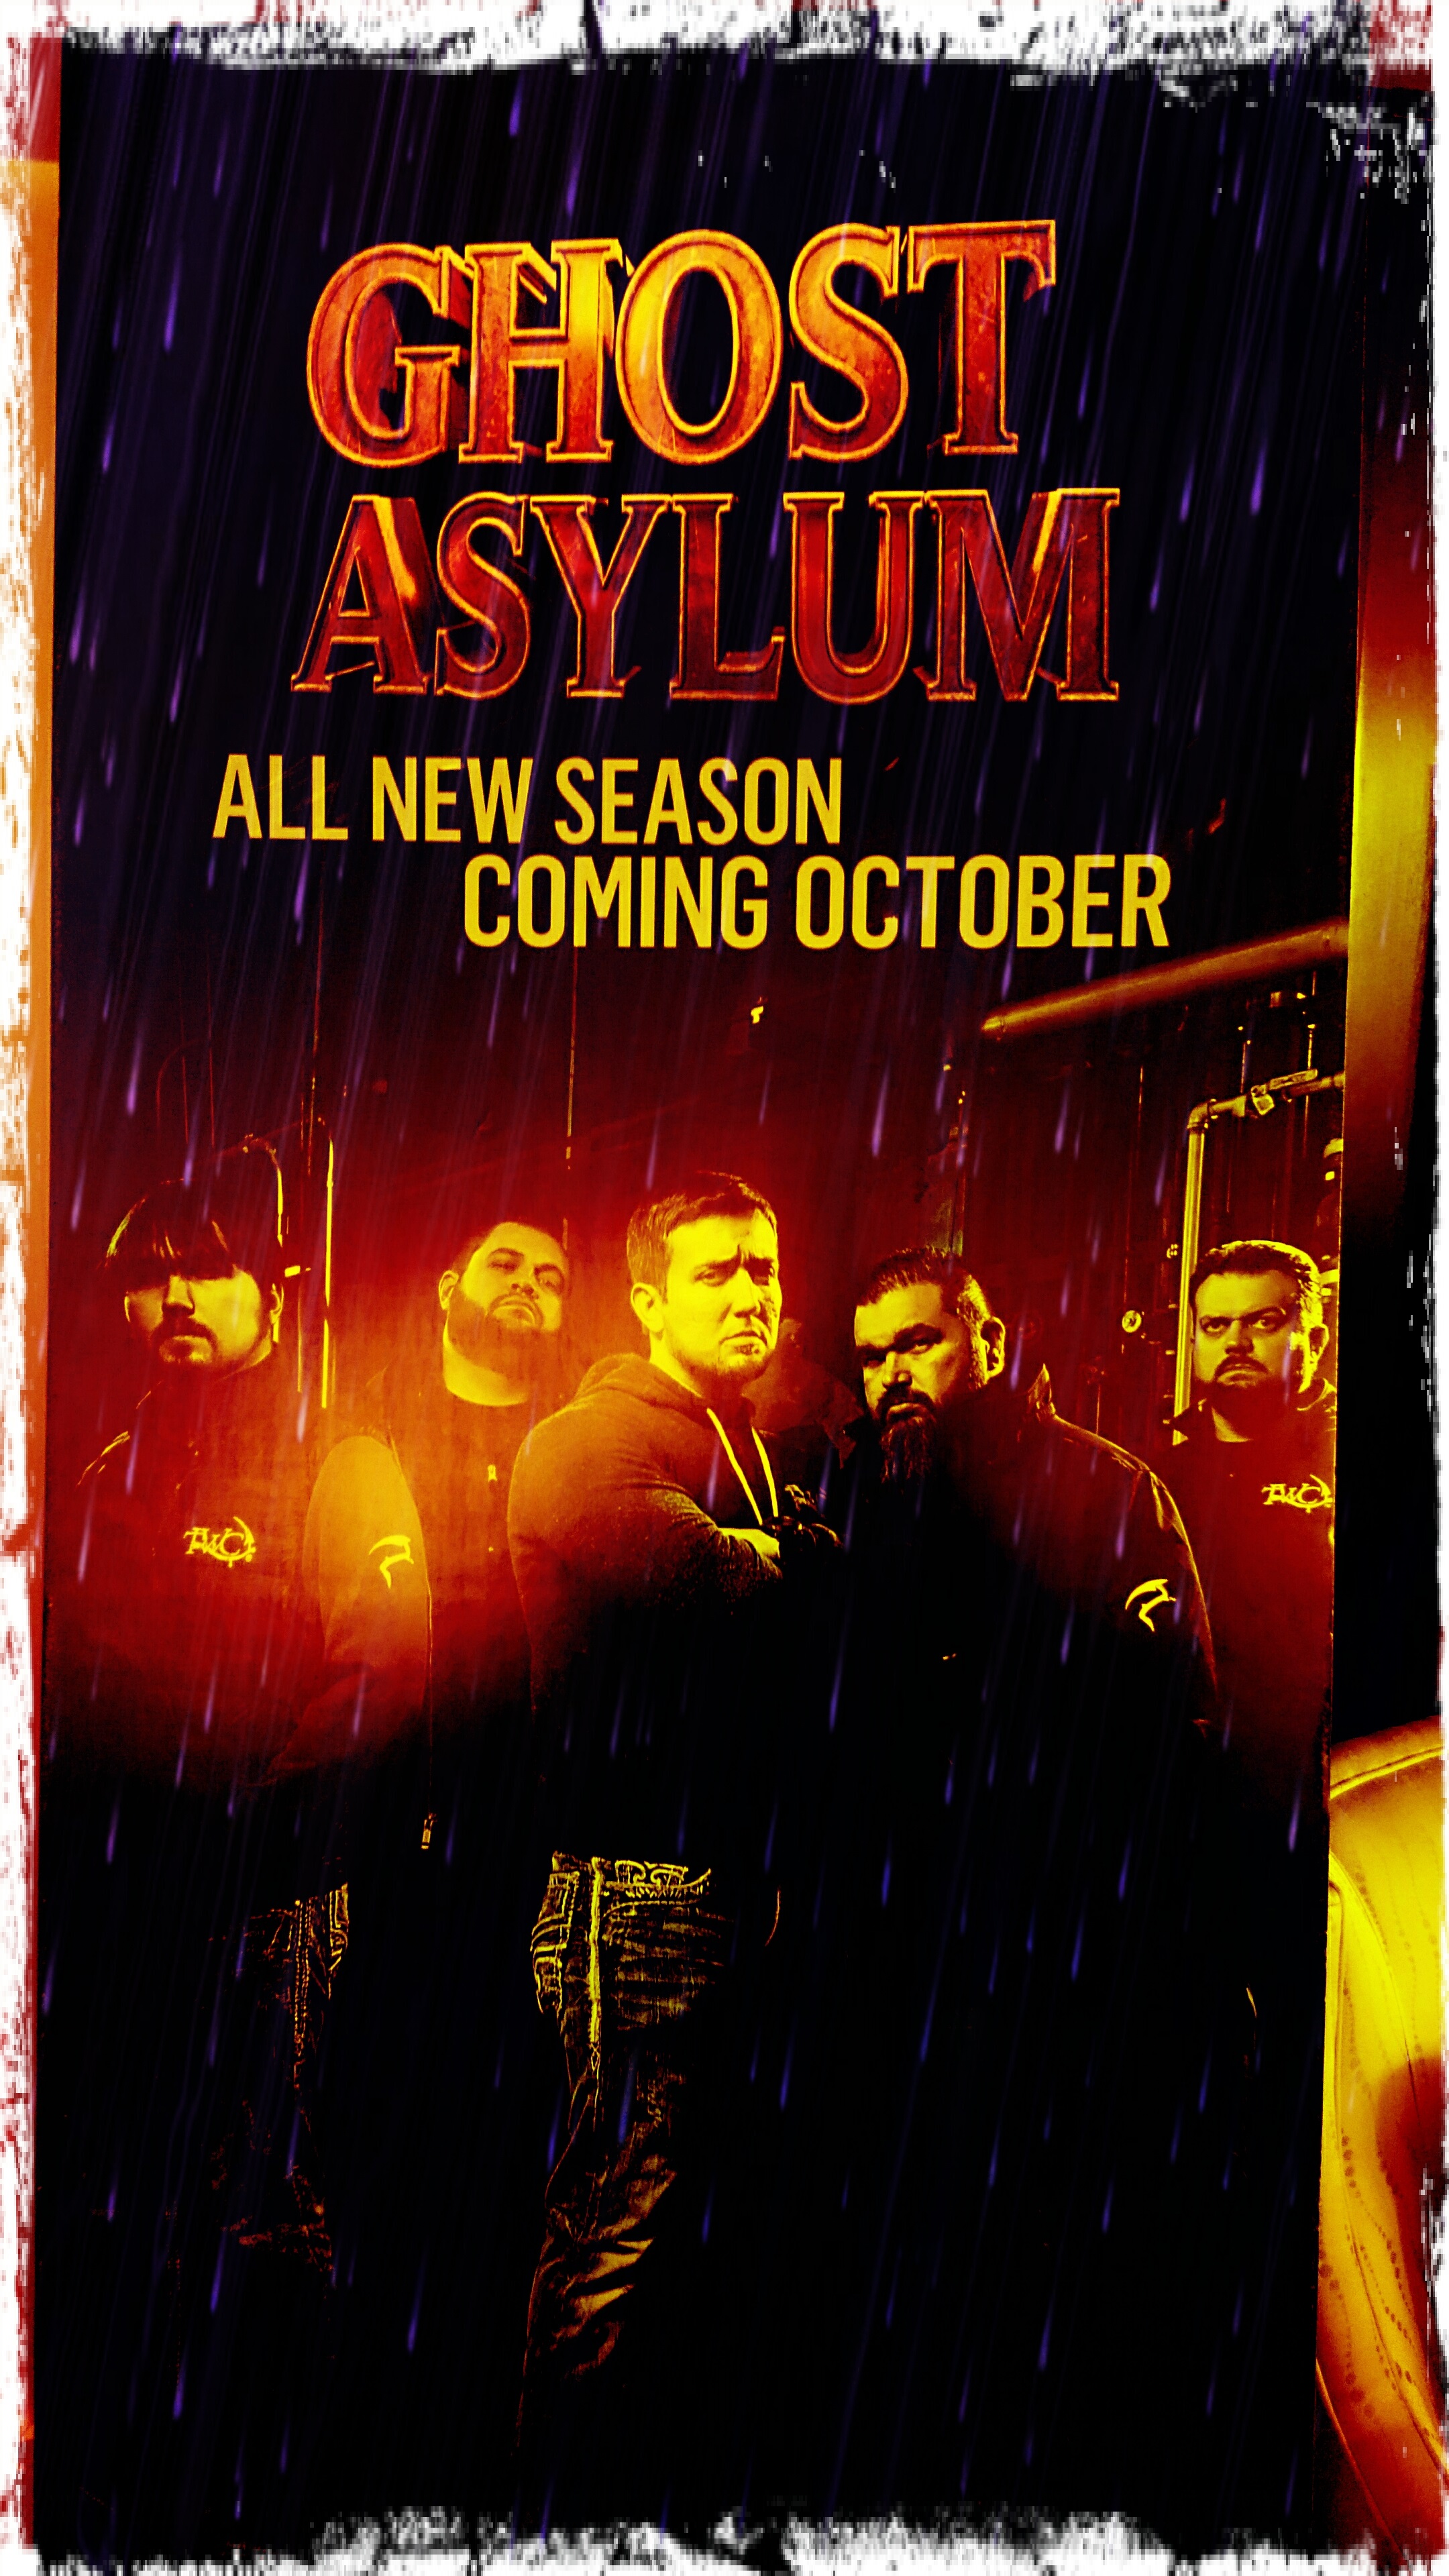 Ghost Asylum Banner.  Photo by William Walbourne of Syrenia Imagery